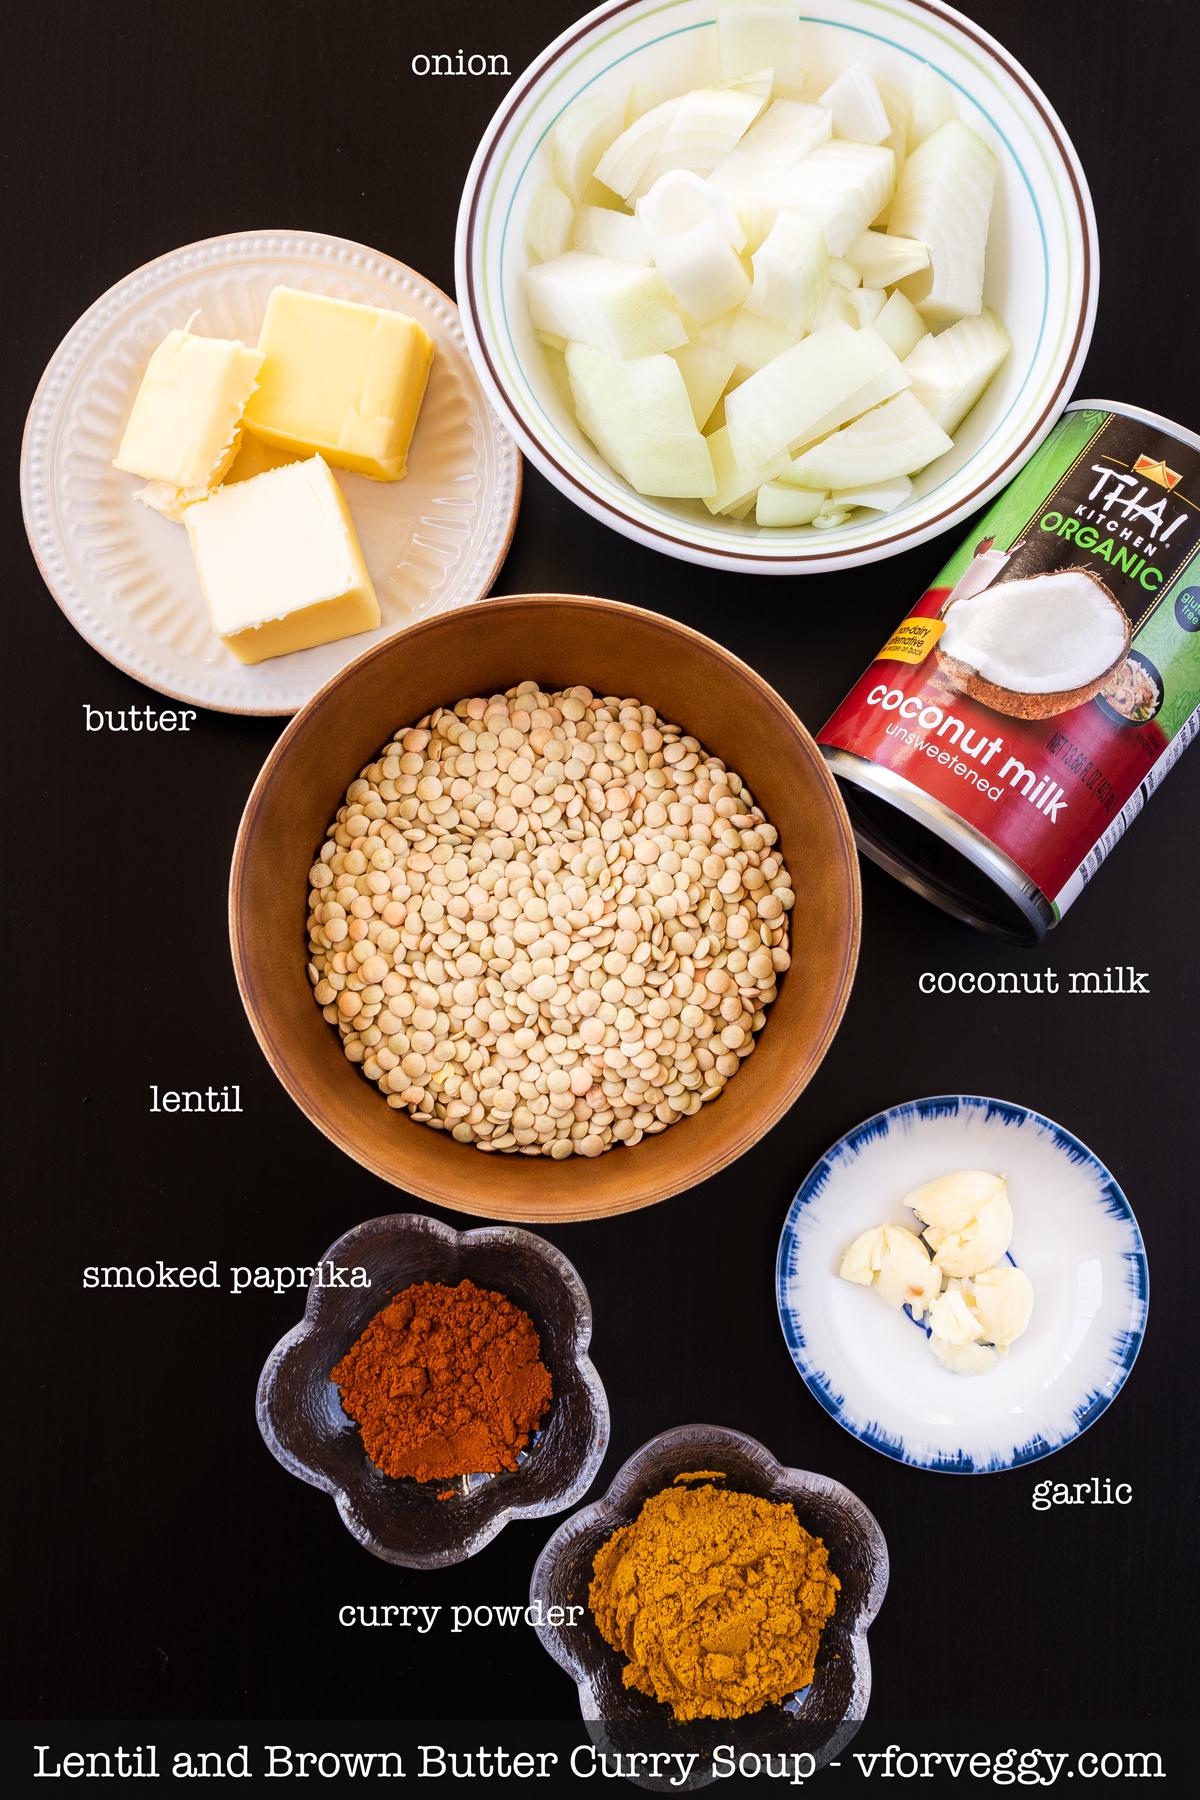 Ingredients for lentil and brown butter curry soup: lentil, butter, onion, garlic, smoked paprika powder, curry powder, and coconut milk.